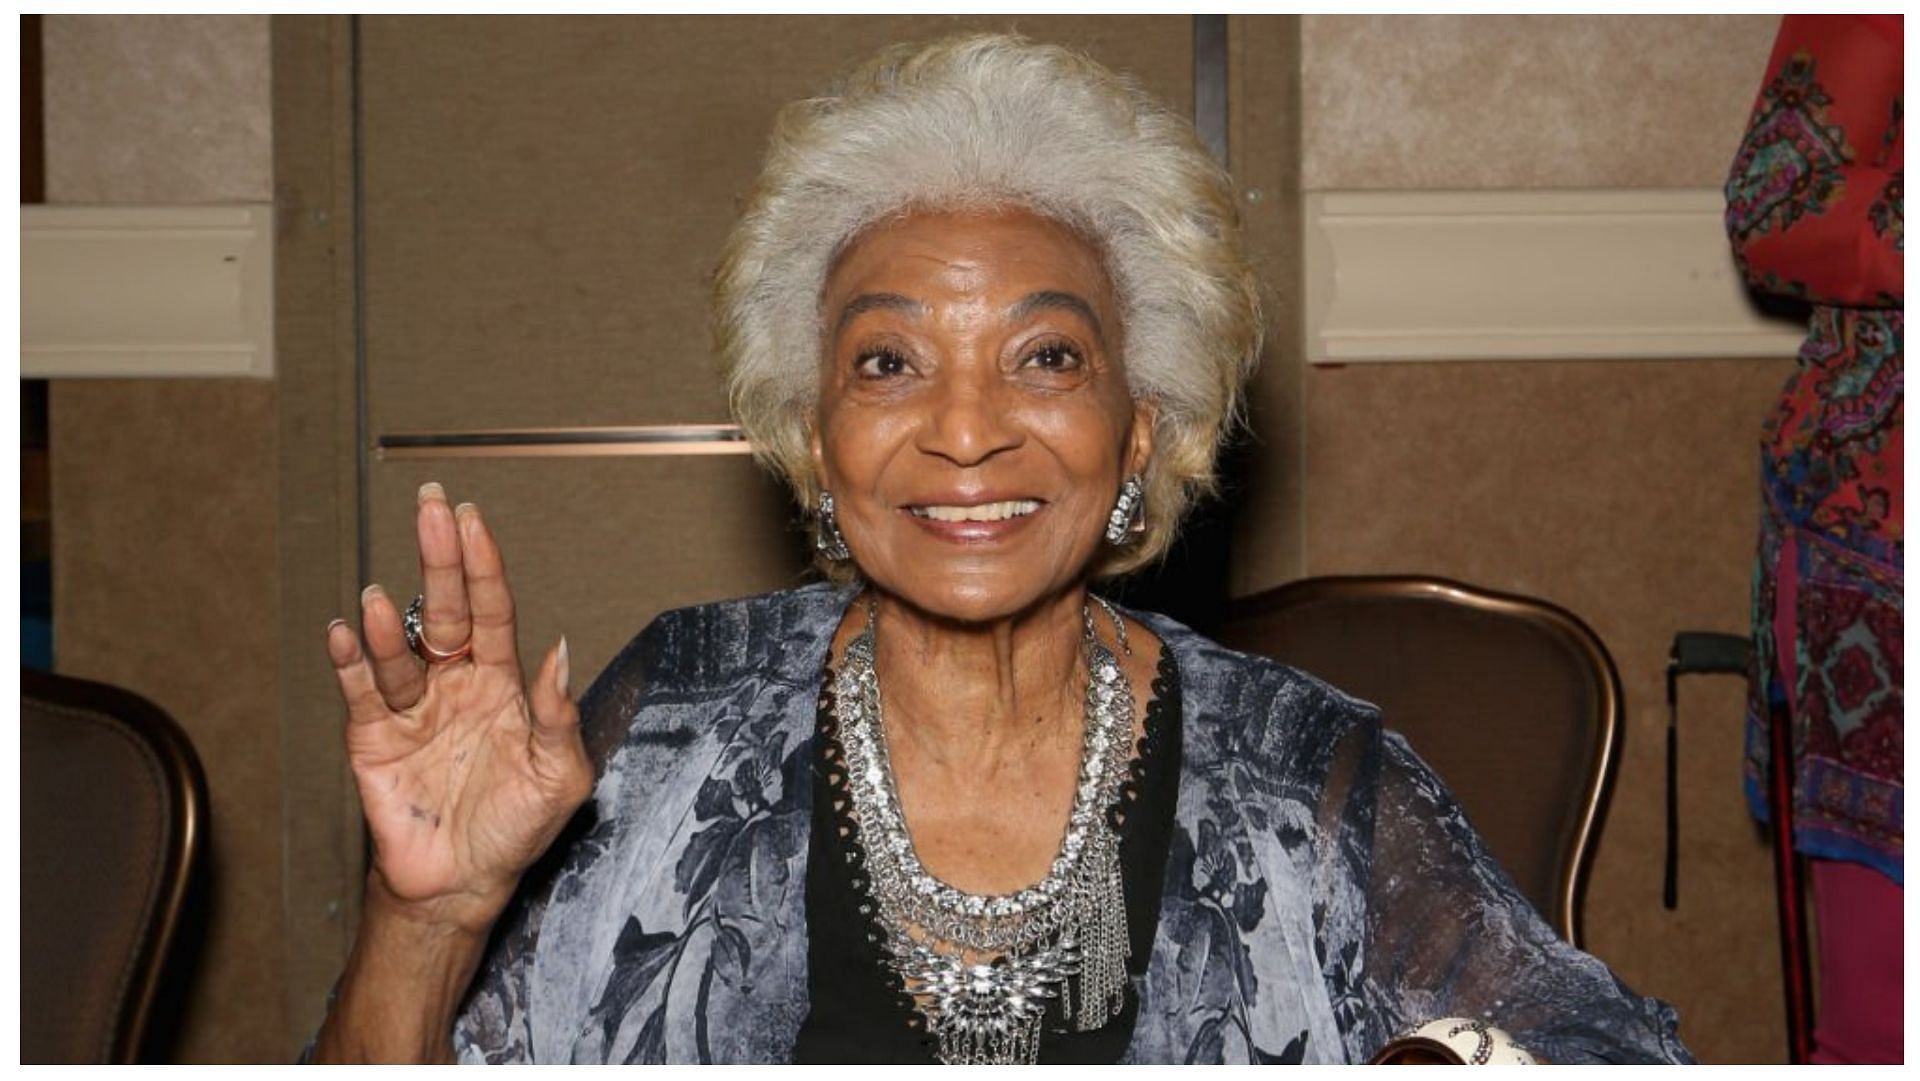 Nichelle Nichols earned a lot from her career in the entertainment industry (Image via Gabe Ginsberg/Getty Images)